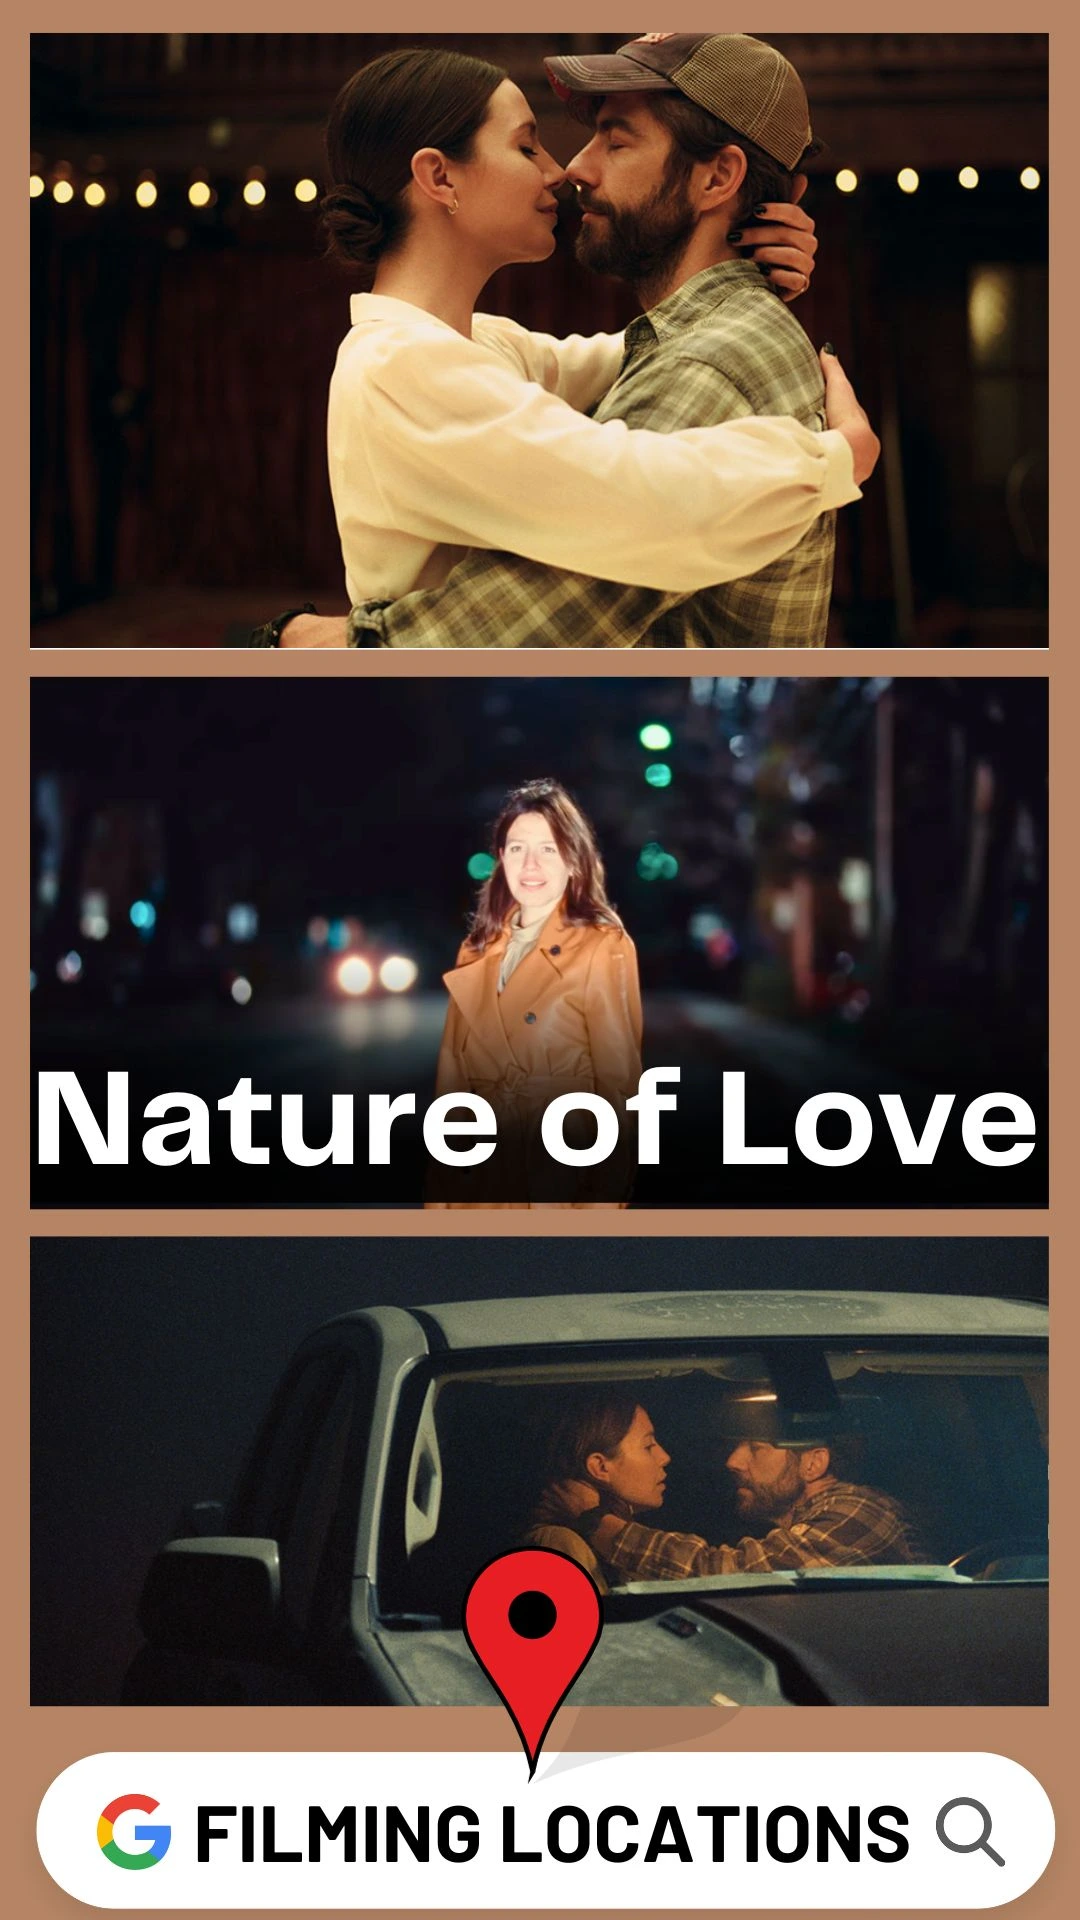 Nature of Love Filming locations